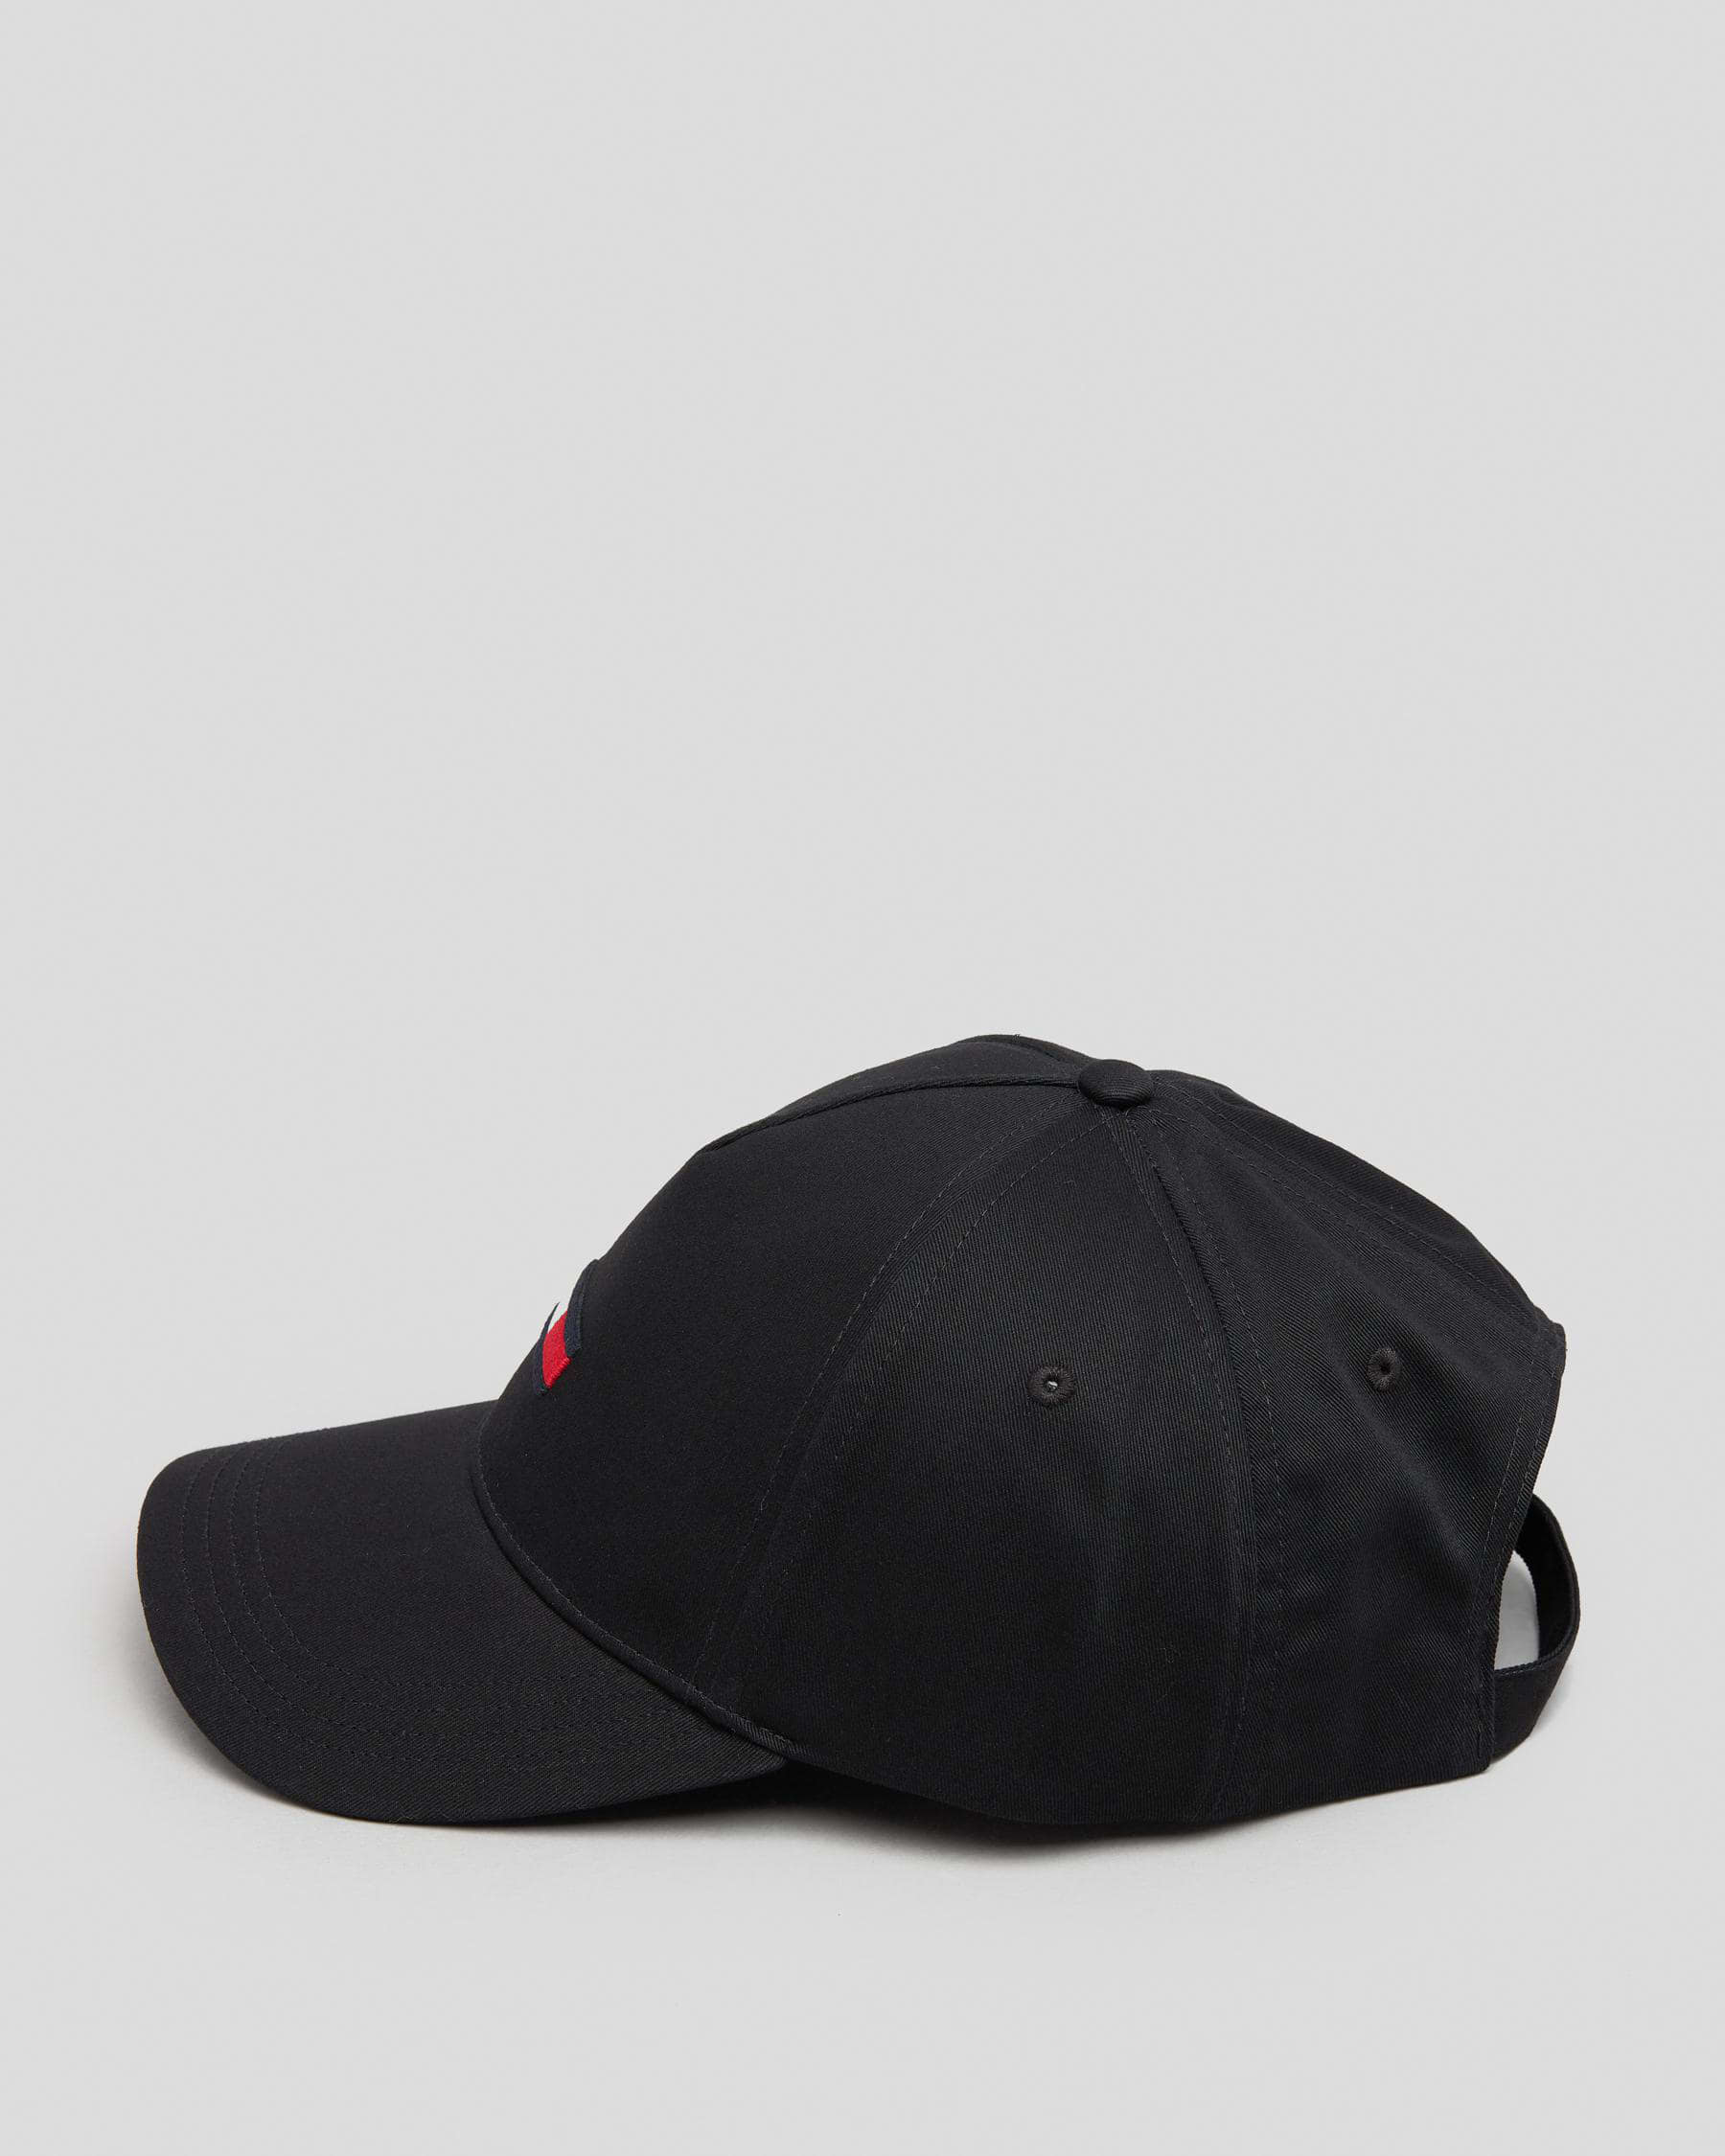 FREE* TJM Hilfiger Black Returns Tommy & Cap City In Shipping States Flag Easy - United - Beach